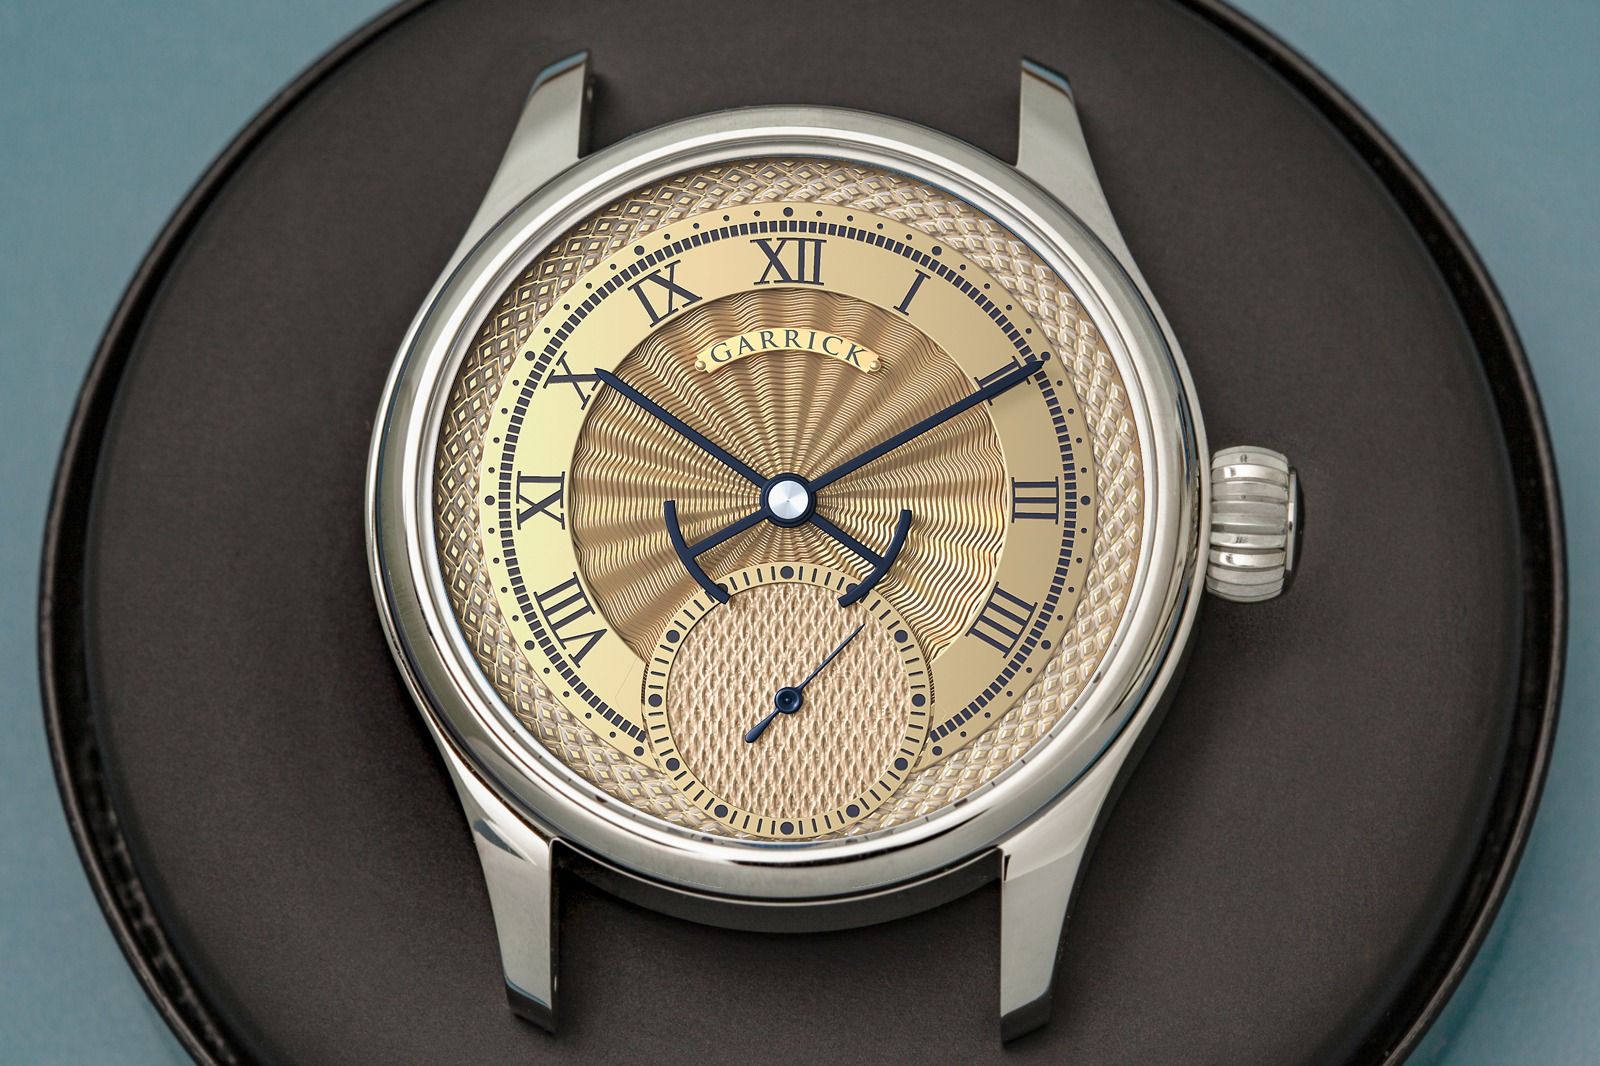 British made S7 watch with guilloche dial and 38mm case by garrick Watchmakers